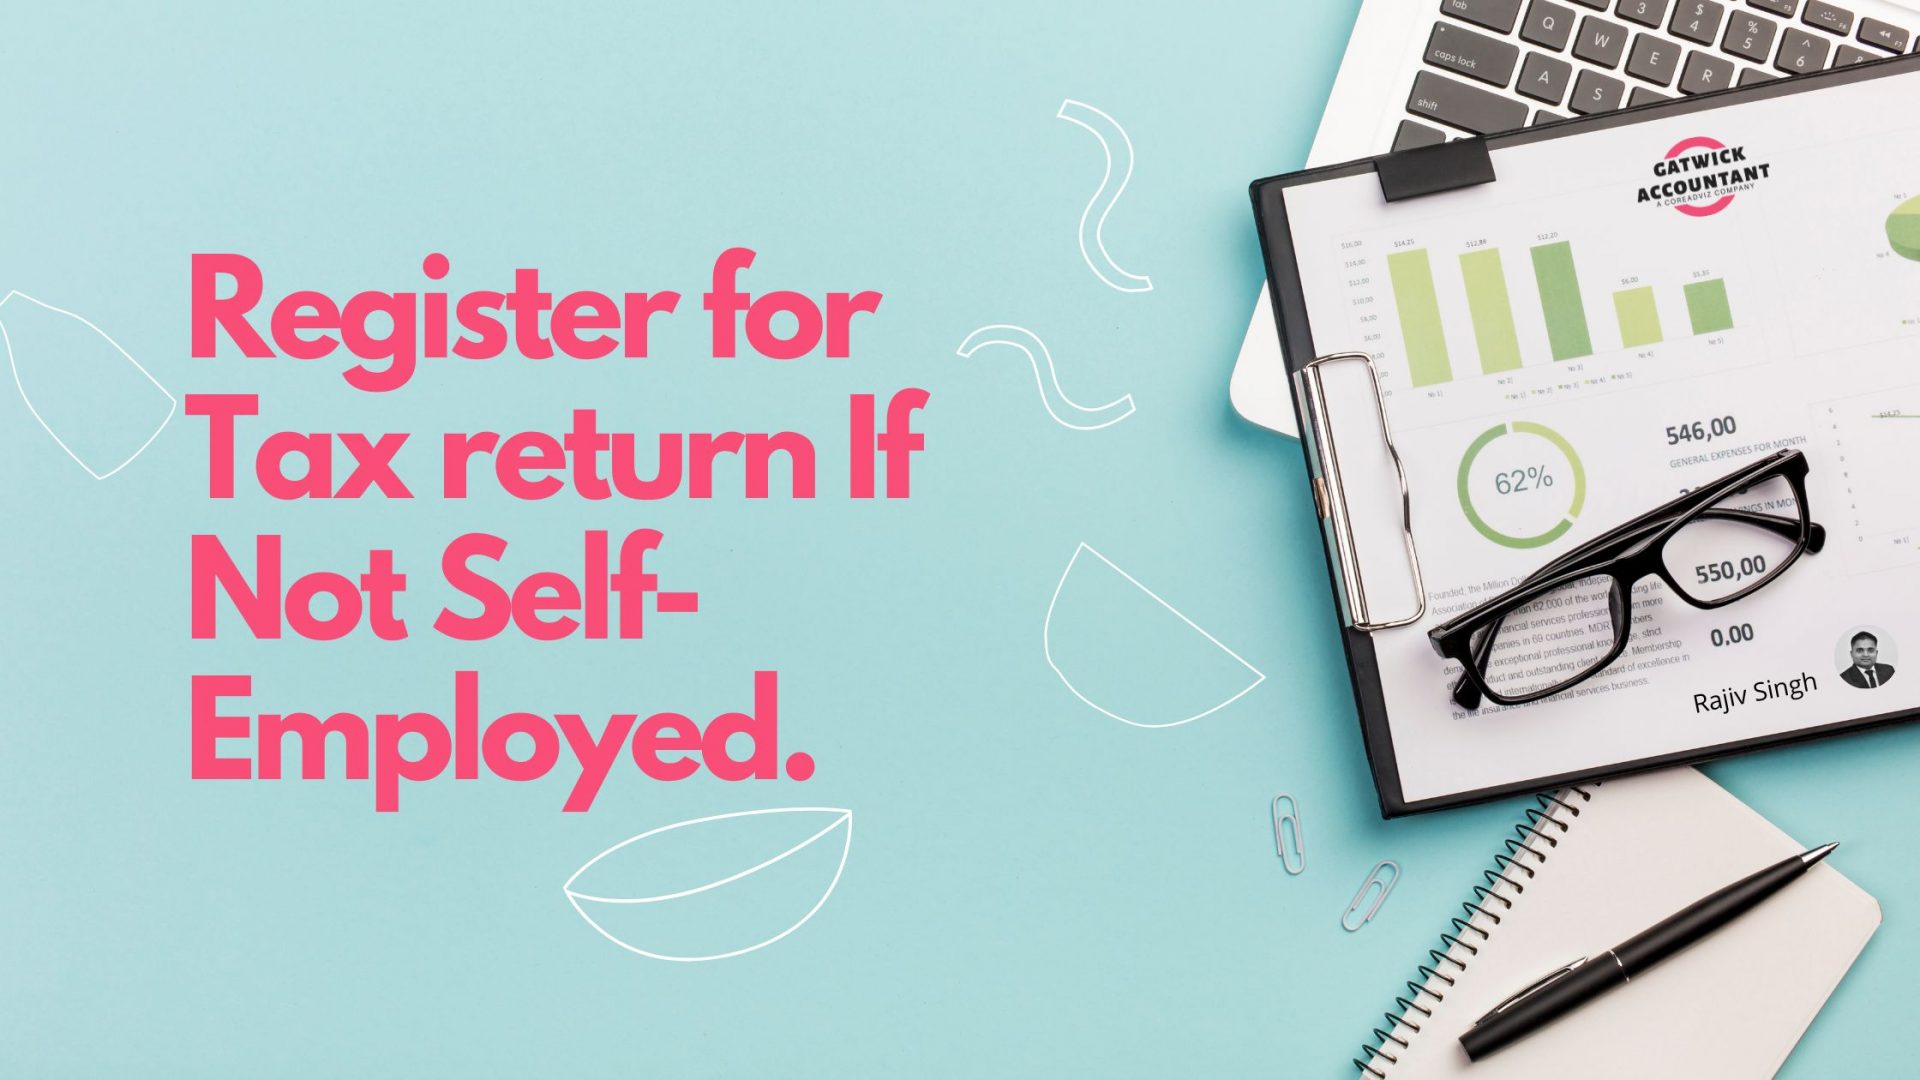 Register for Self-Assessment Income Tax Return For Not Self-Employed -Image cover